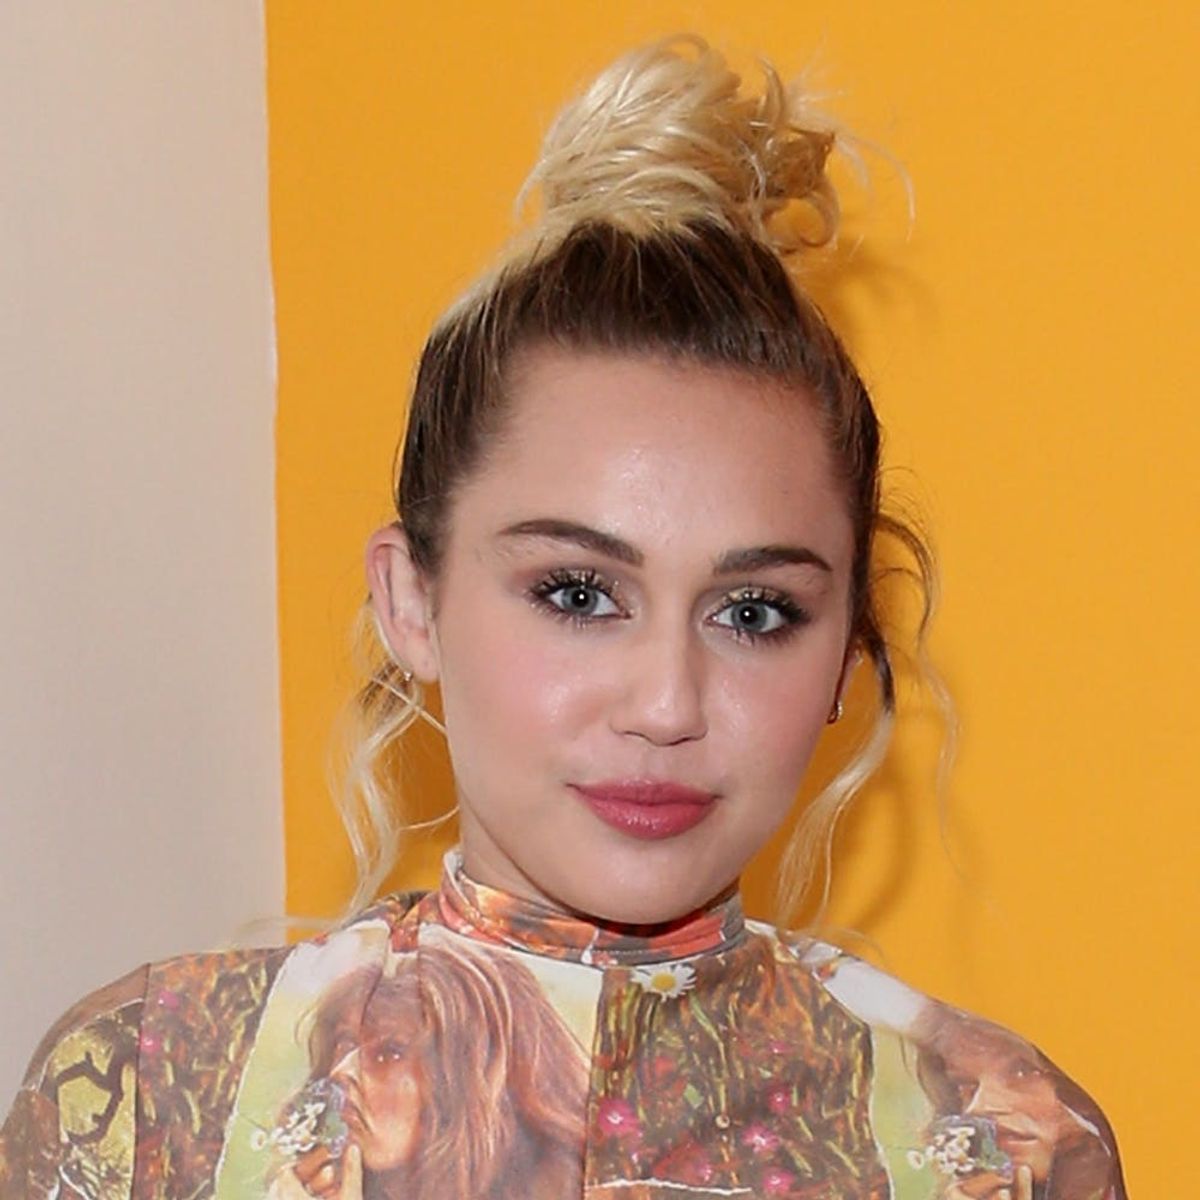 Whoa: Miley Cyrus Is Totally Twinning With Her Little Sister Noah